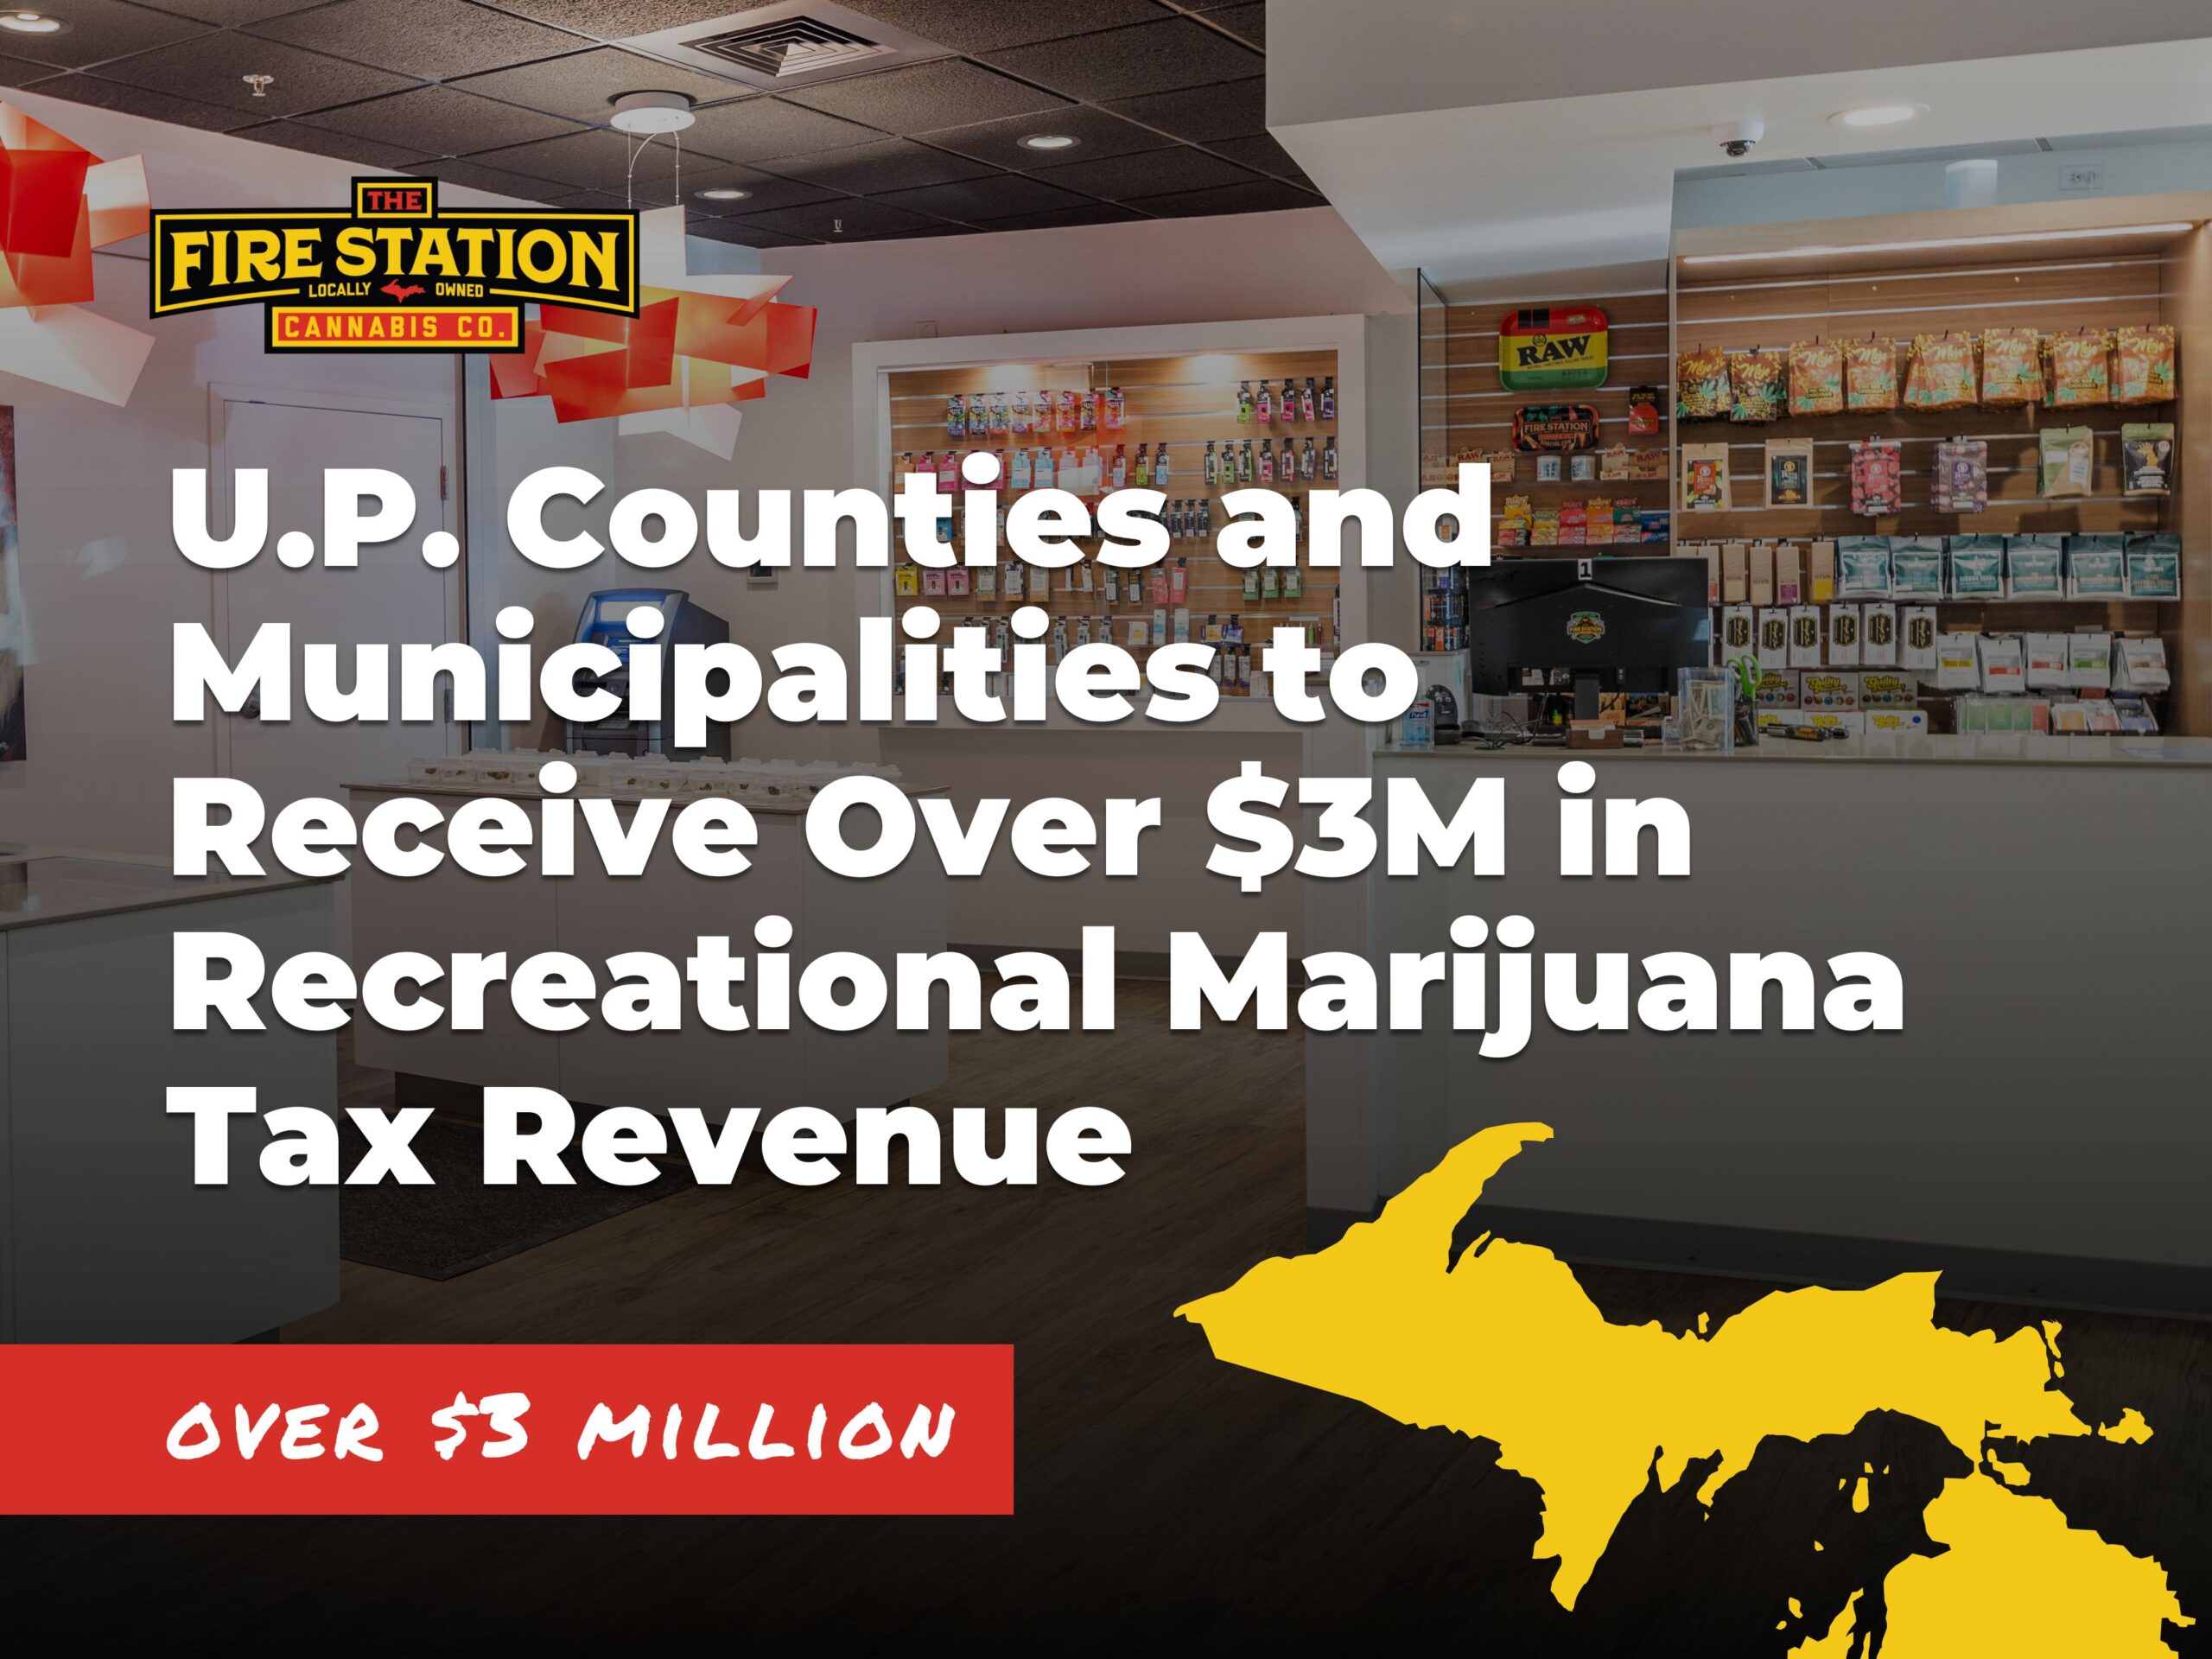 U.P. counties and municipalities to receive over $3M in recreational marijuana tax revenue. The Fire Station Cannabis Co. is a Michigan-based dispensary.